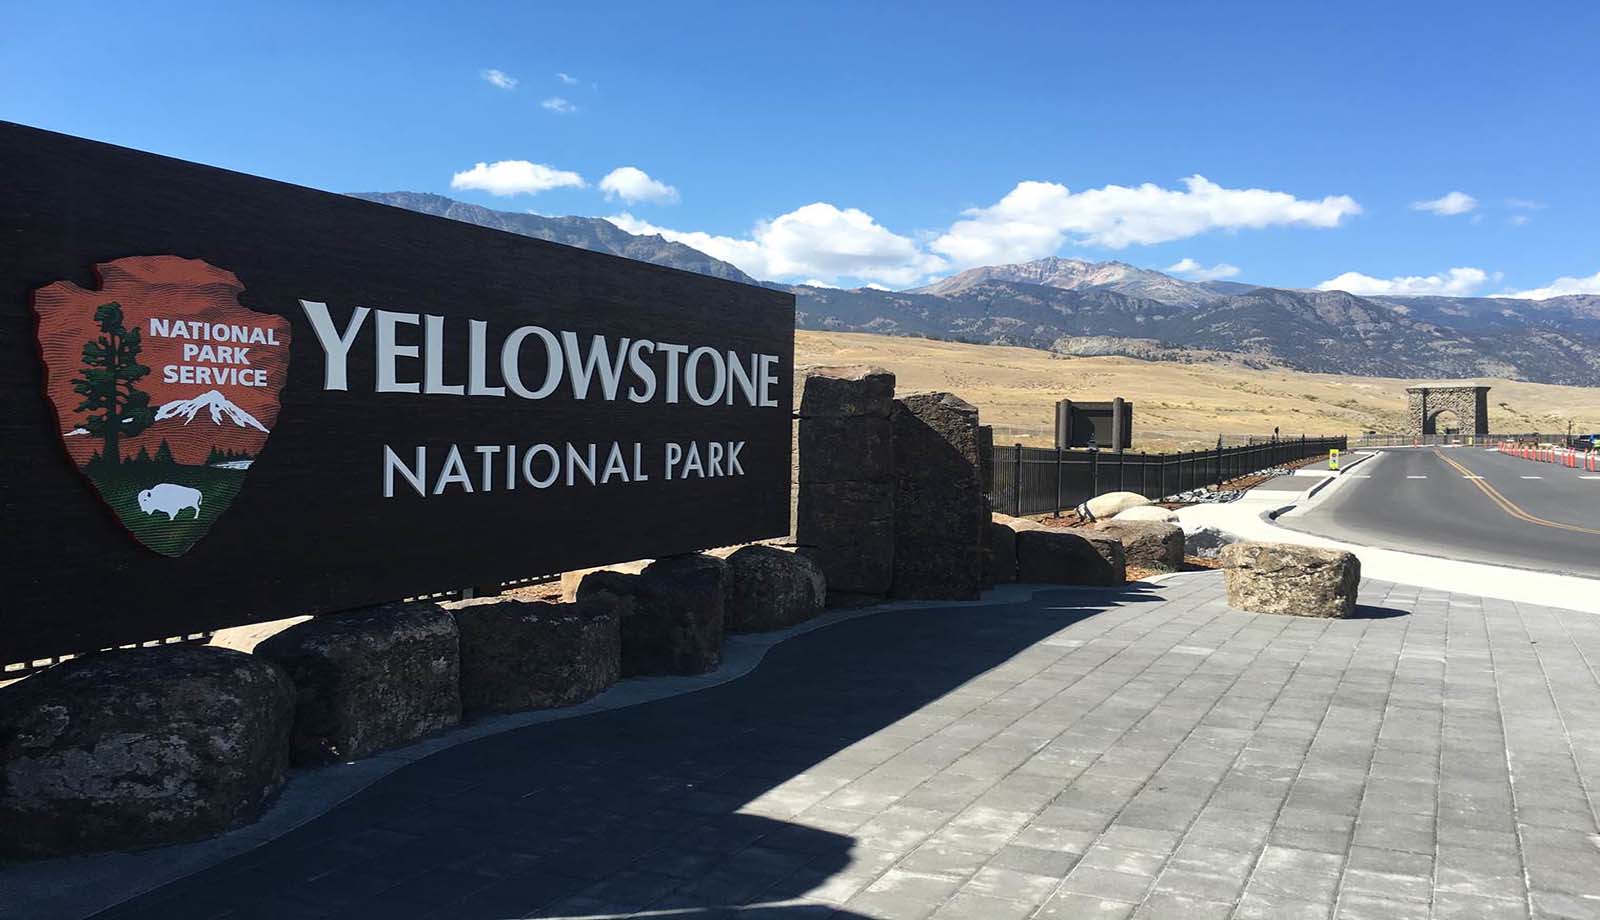 Yellowstone Volcano: One of The Largest Volcanoes in the US